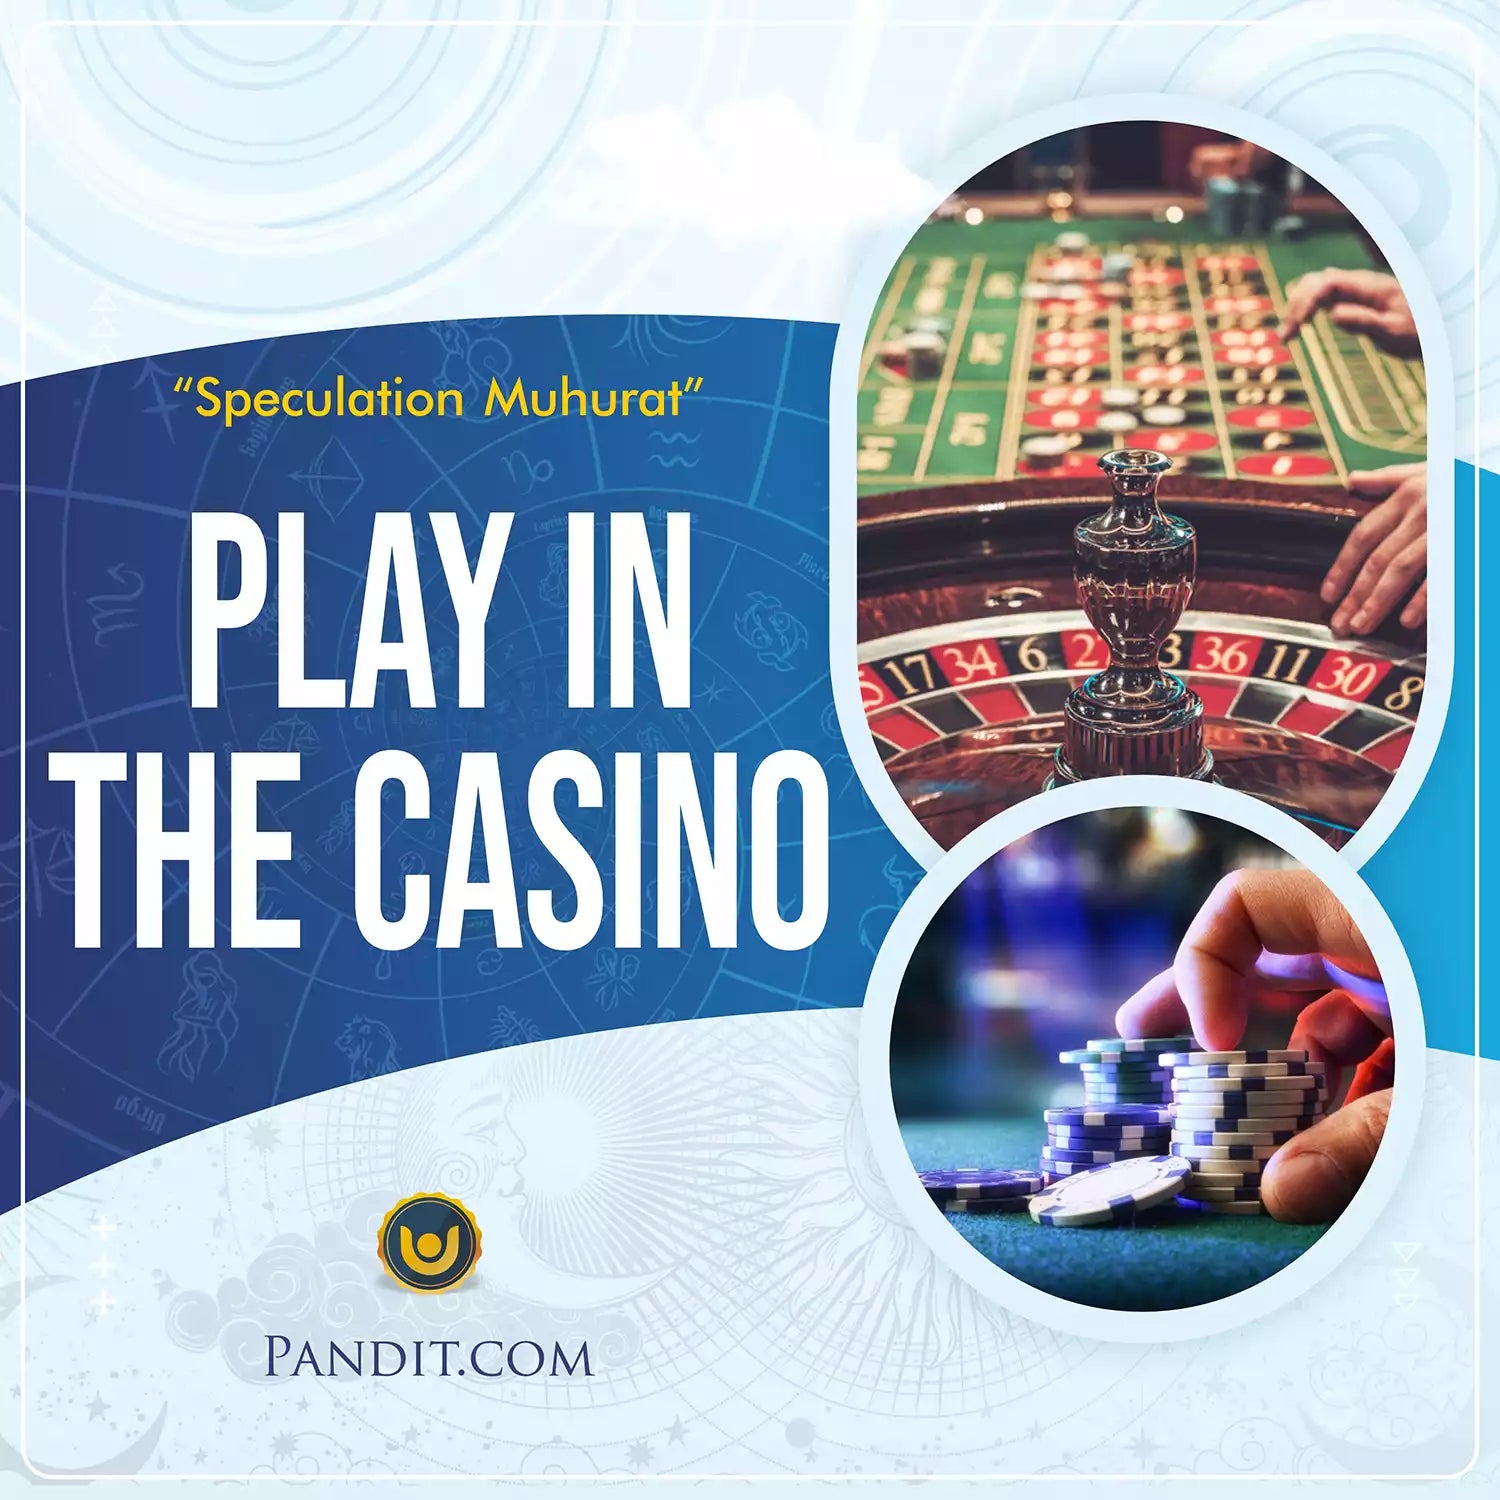 Play in The Casino